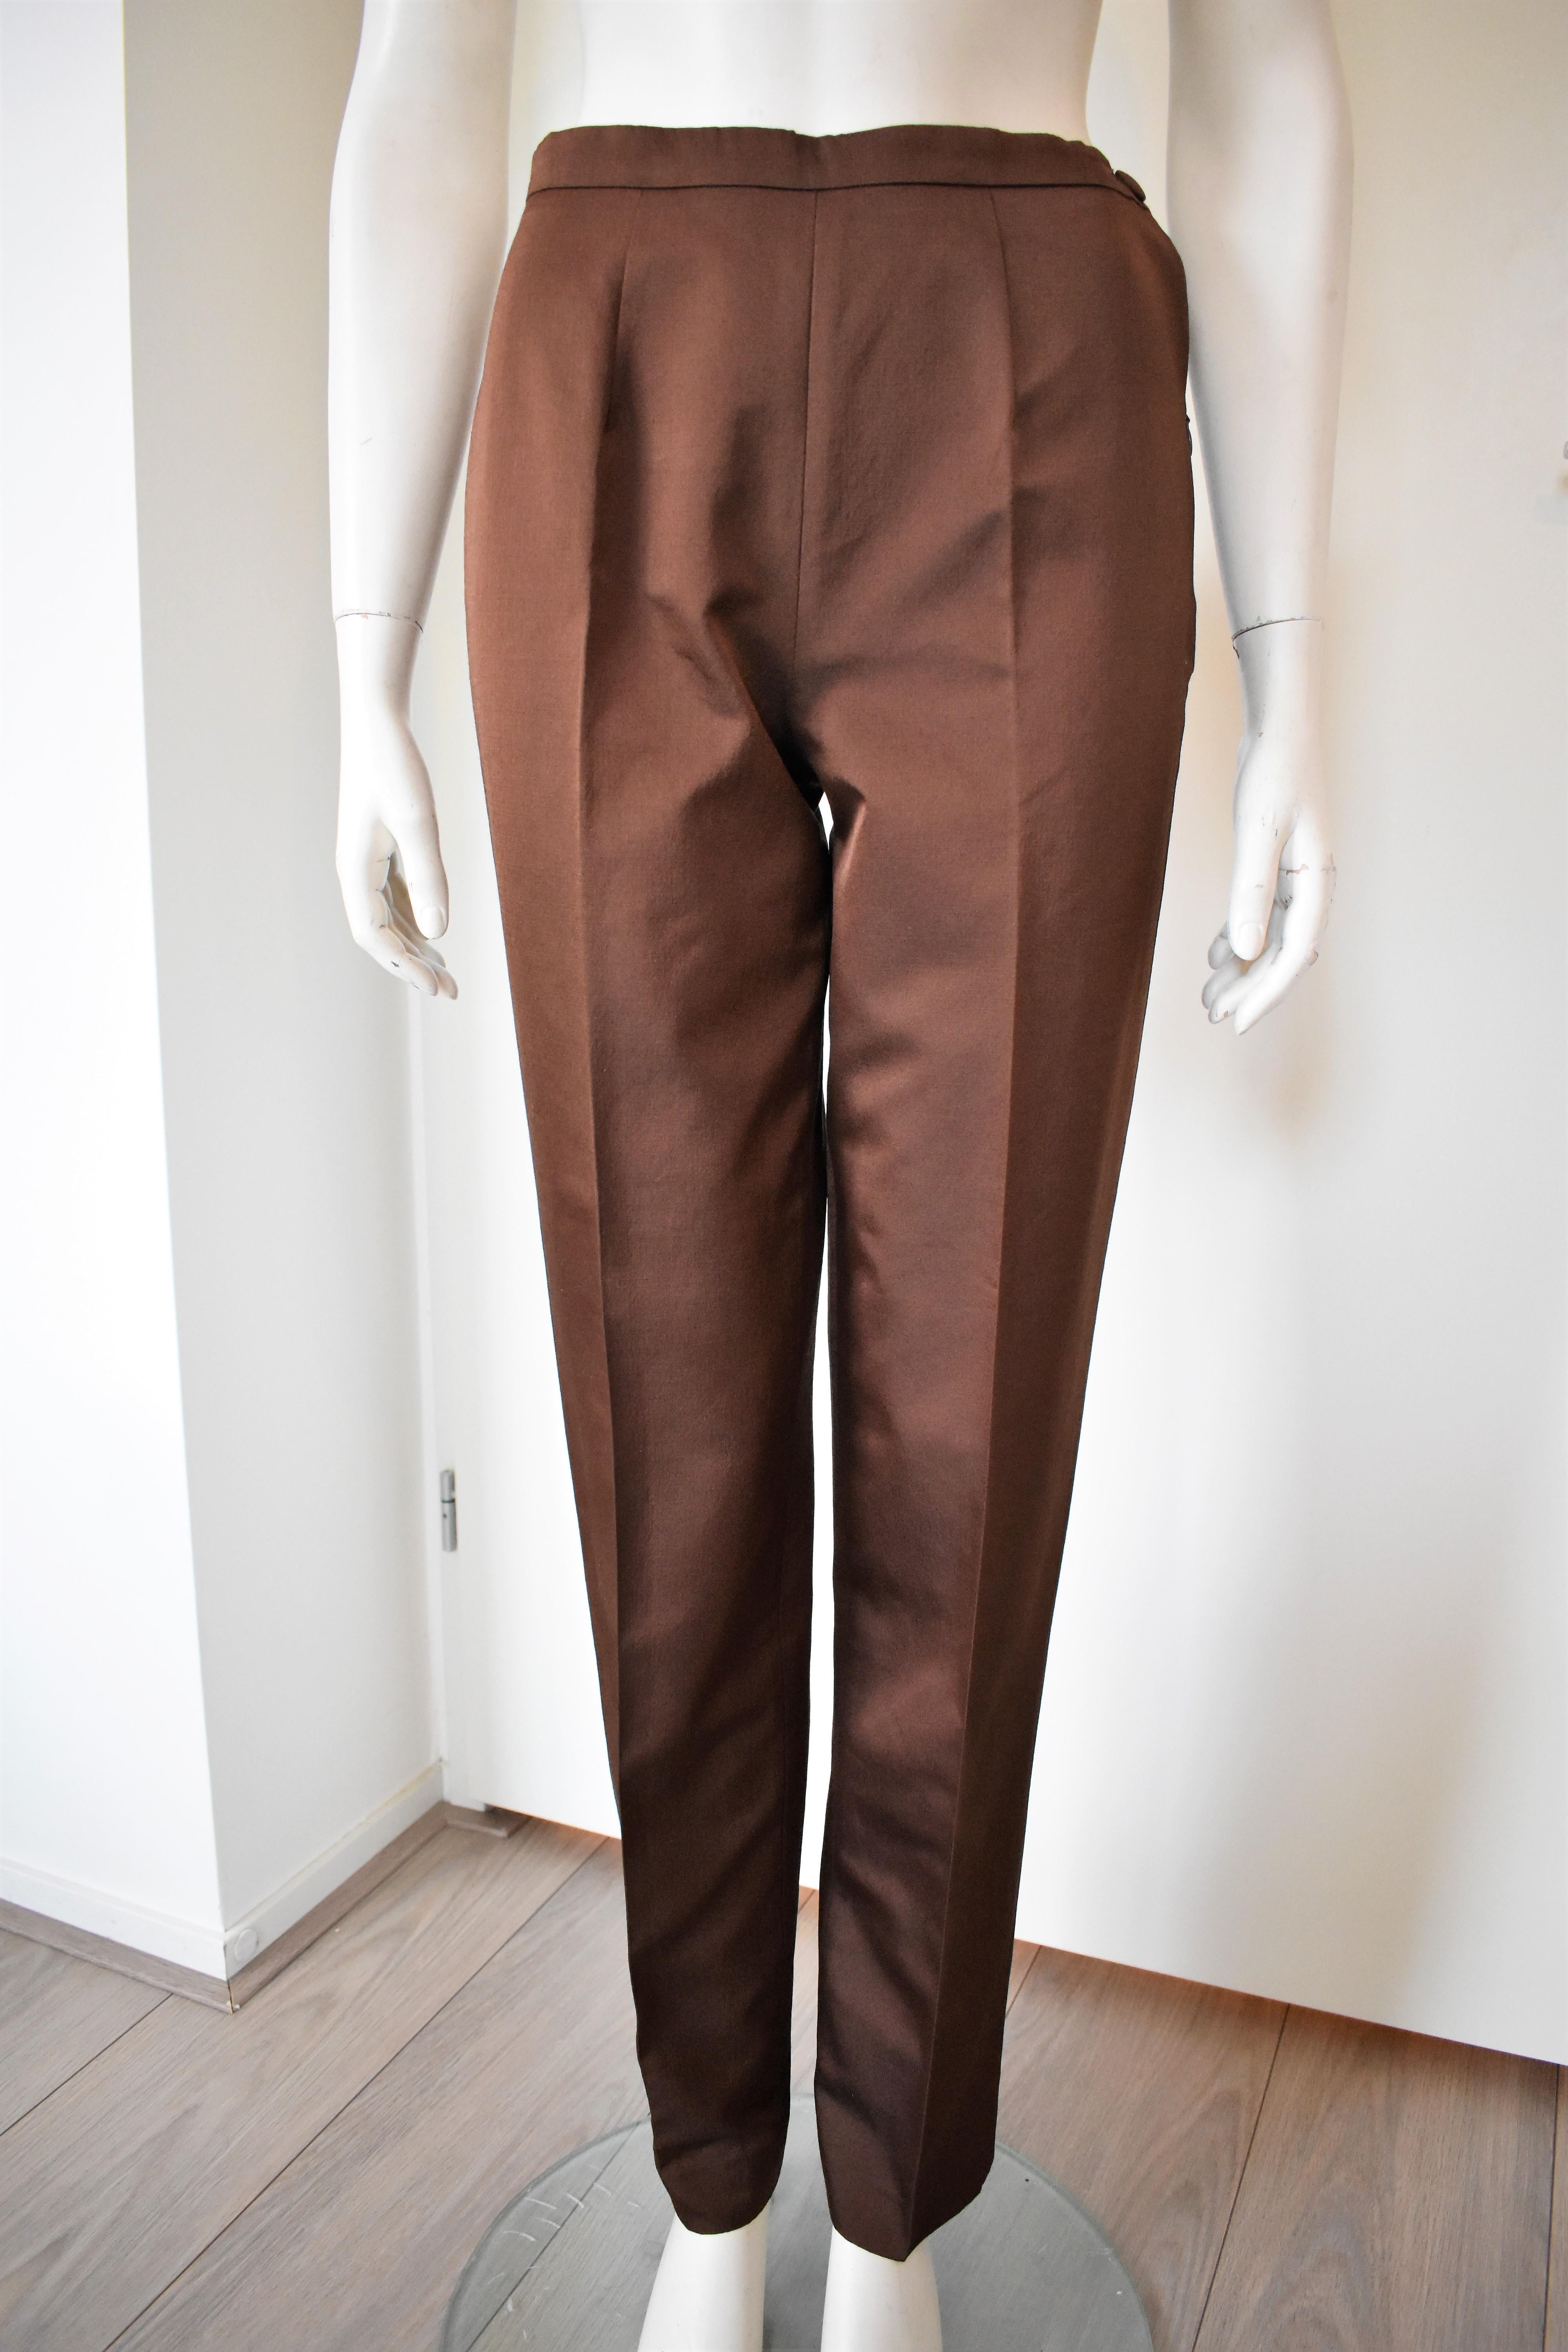 Beautiful cut pants by Albera Ferreti, hardly worn. Before shipping, the pants will be sent to a specialist for a complementary dry cleaning, so it will be perfect and ready to wear upon arrival. 